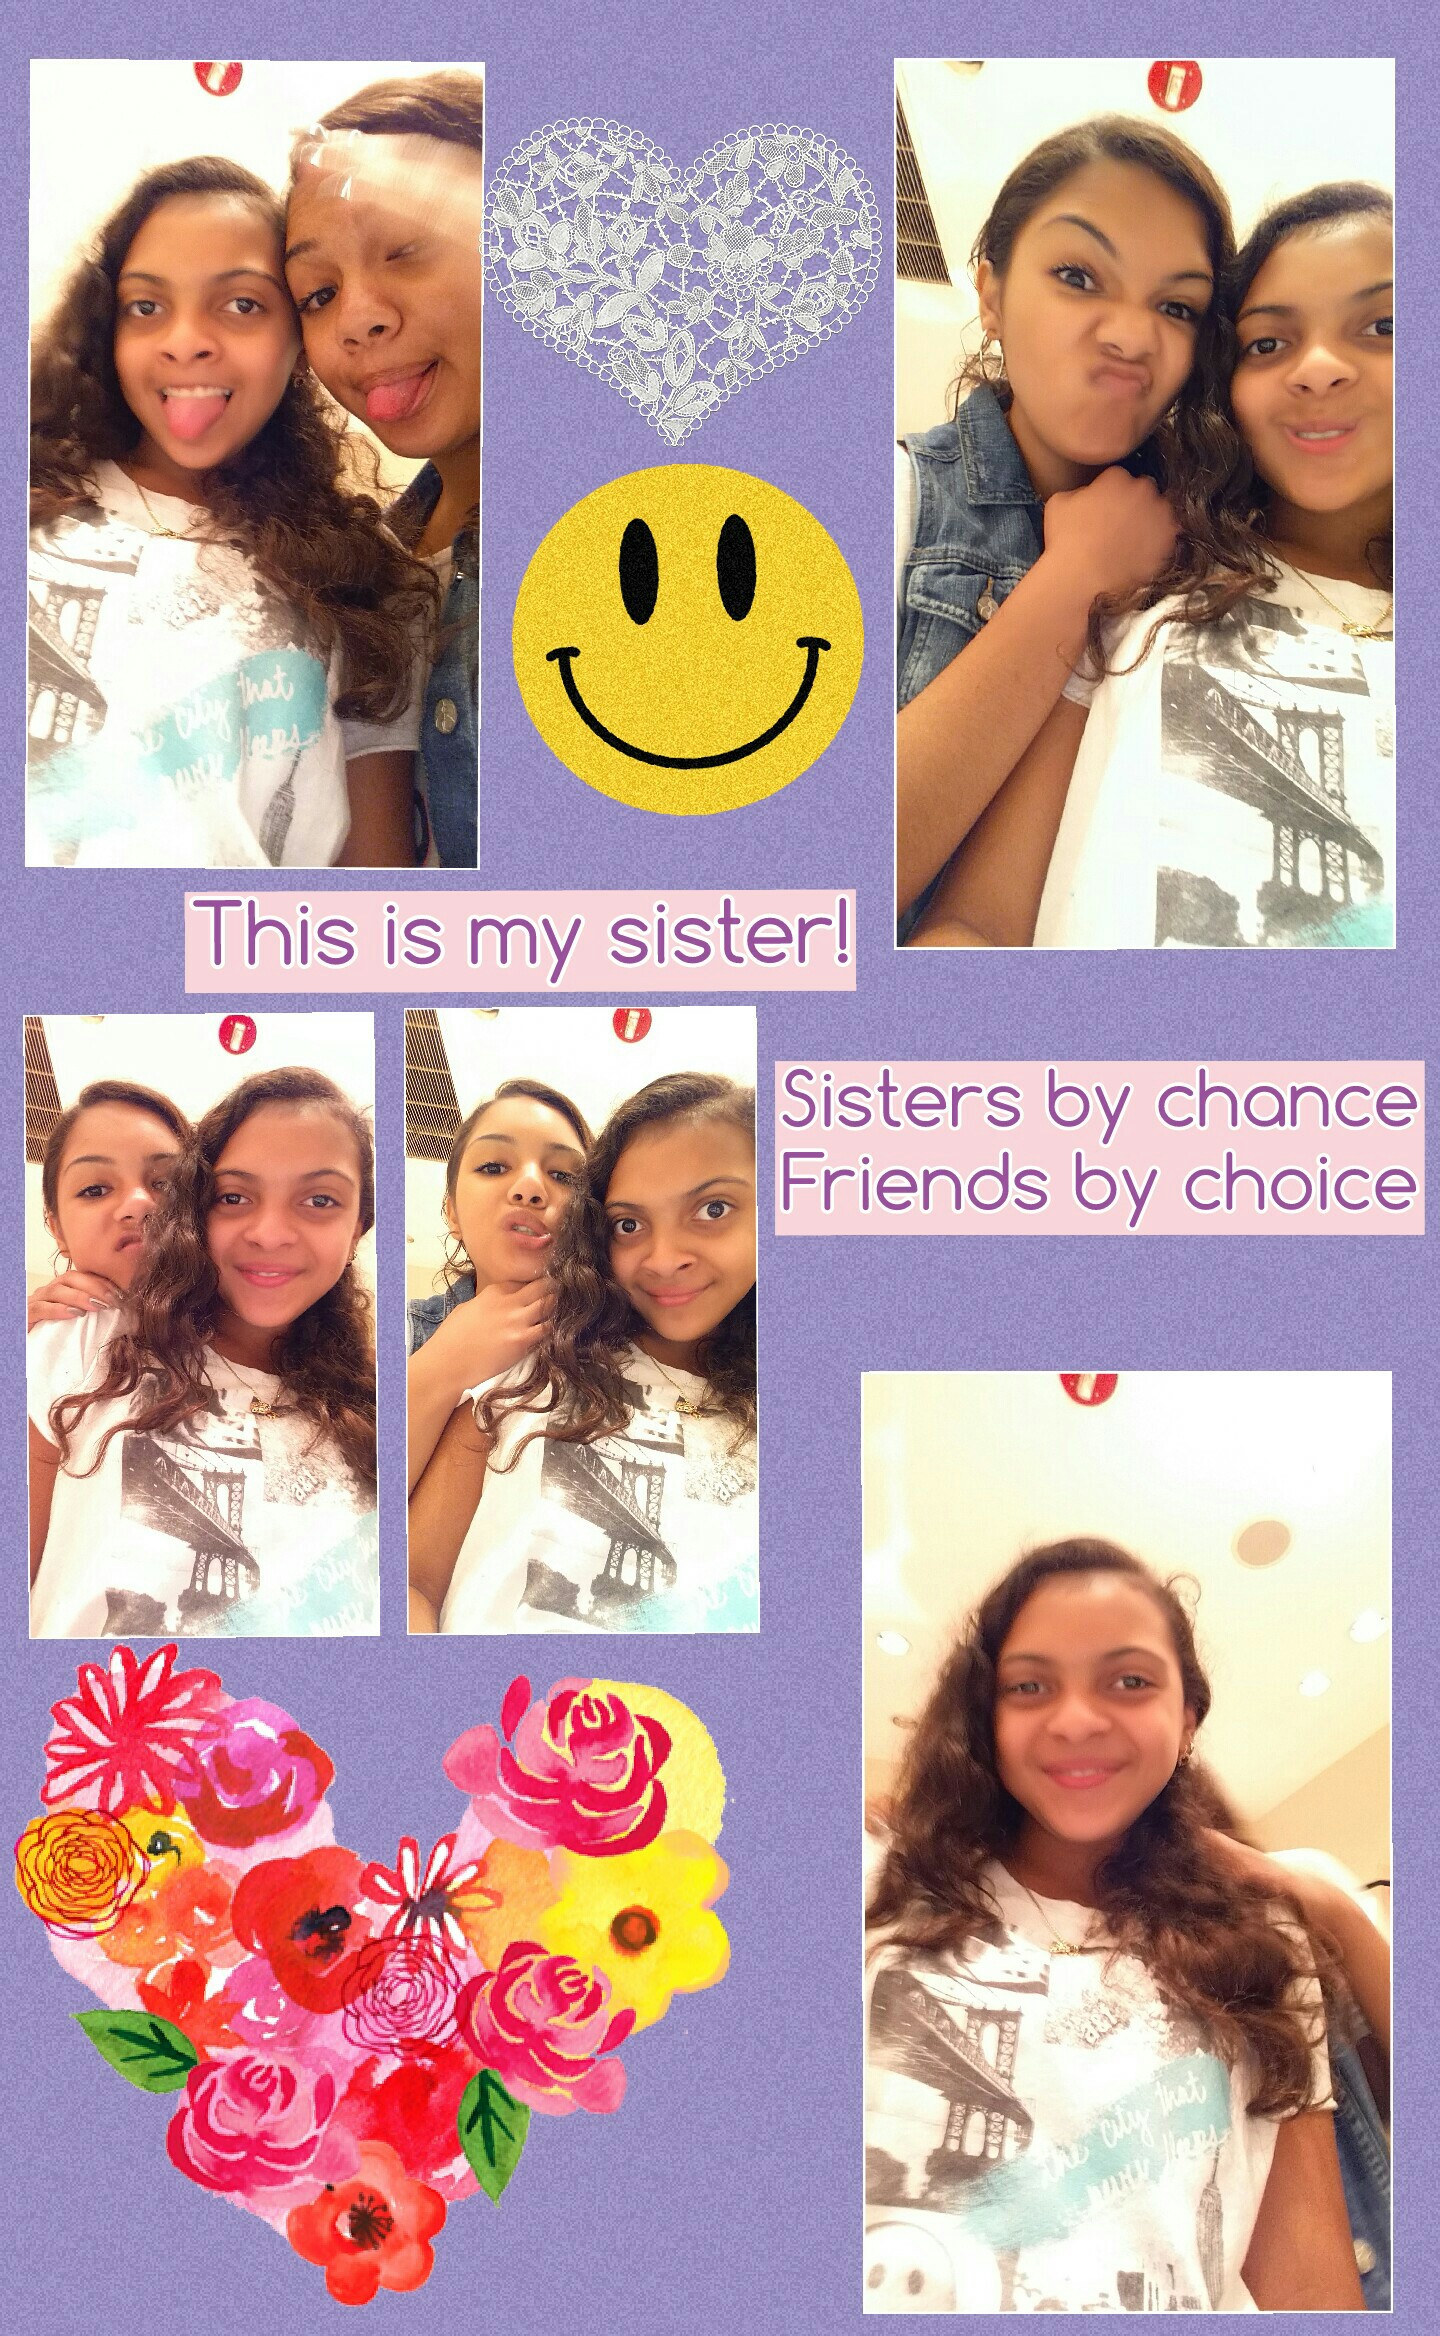 This is my sister!
Follow for follow back